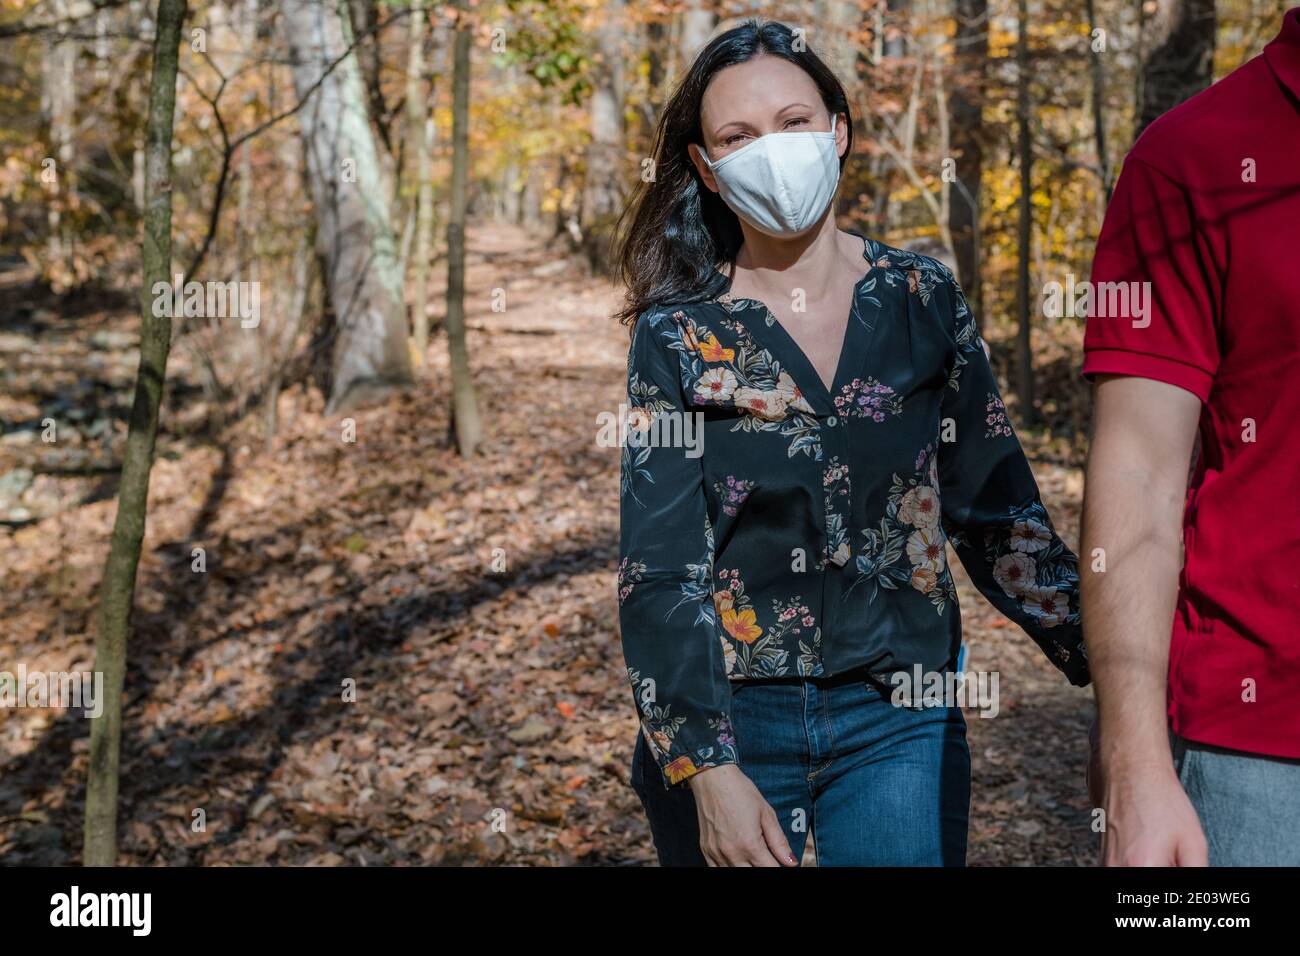 Middle age woman wearing face mask on hike in woods Stock Photo